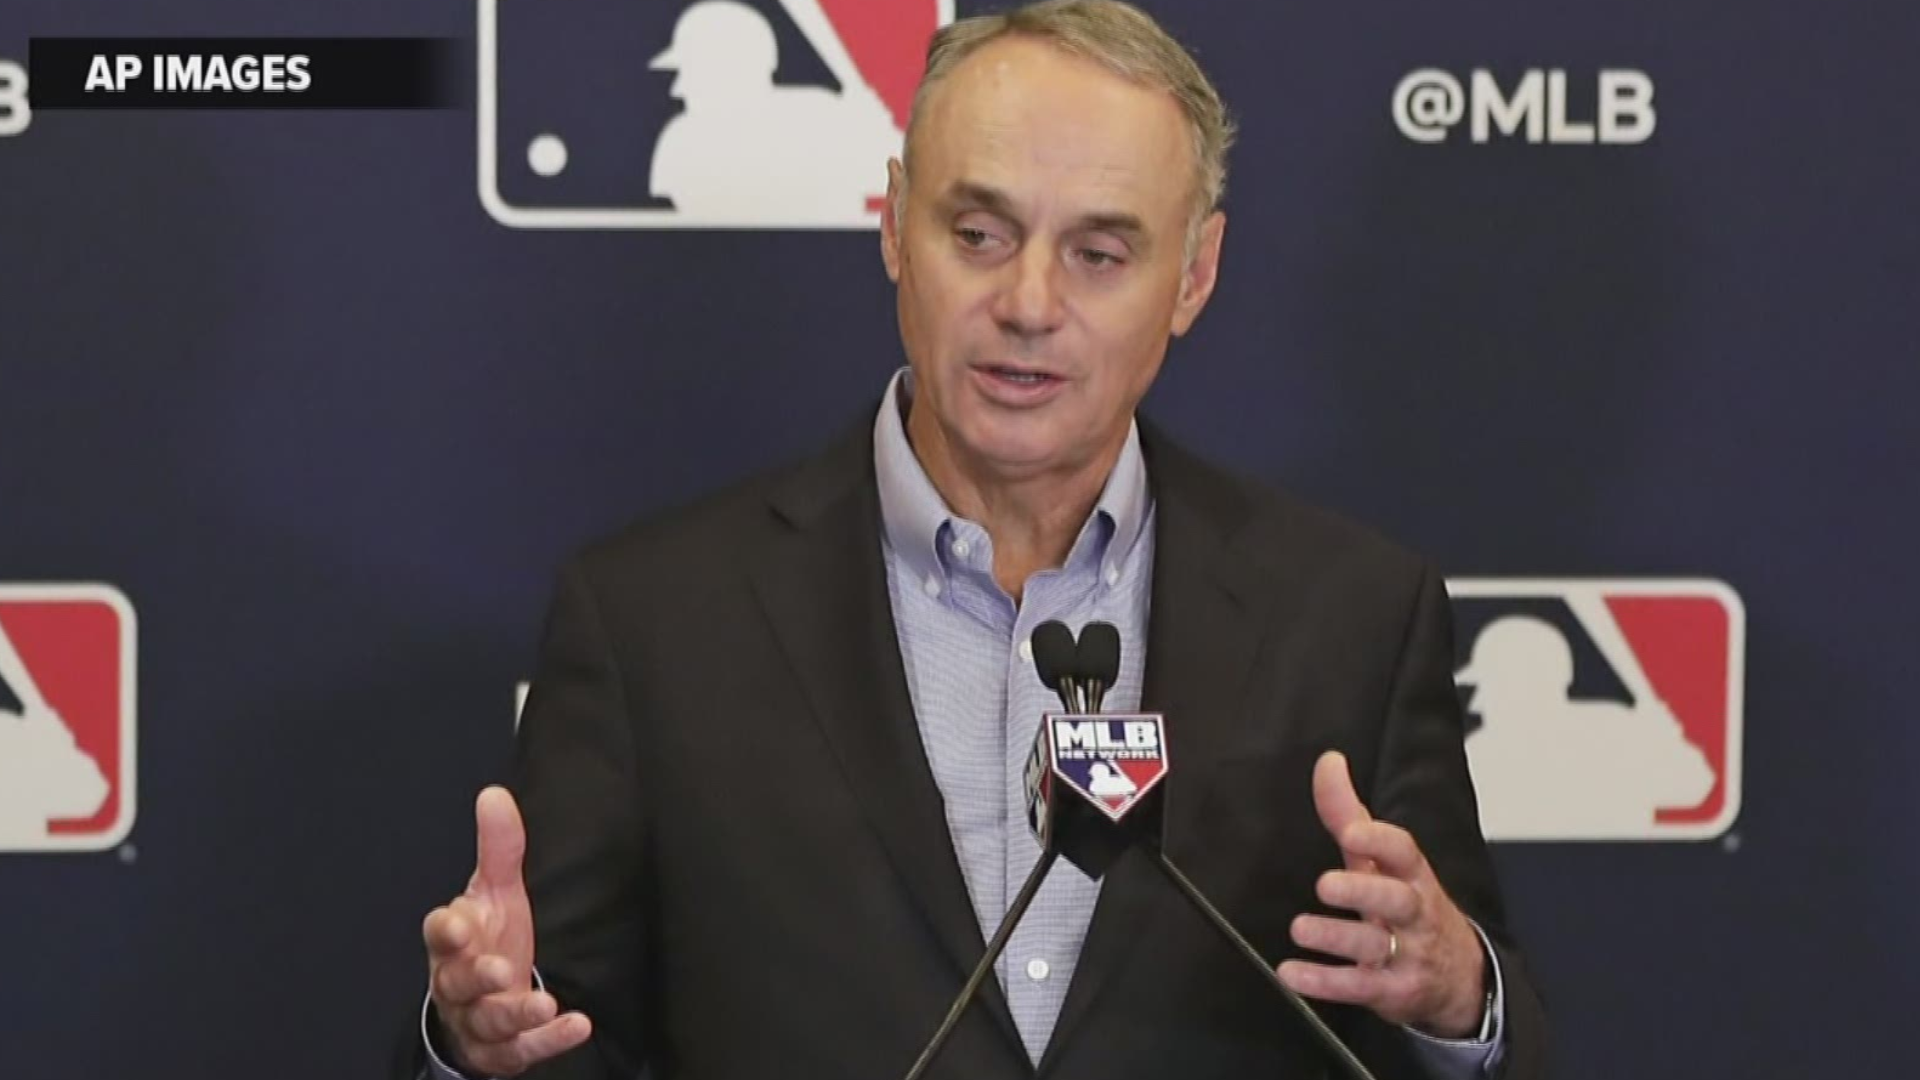 An 11Alive source said that Rob Manfred meant to praise the Braves for eliminating Chief Noc-A-Homa many years ago, but inadvertently referenced the Chop cheer.